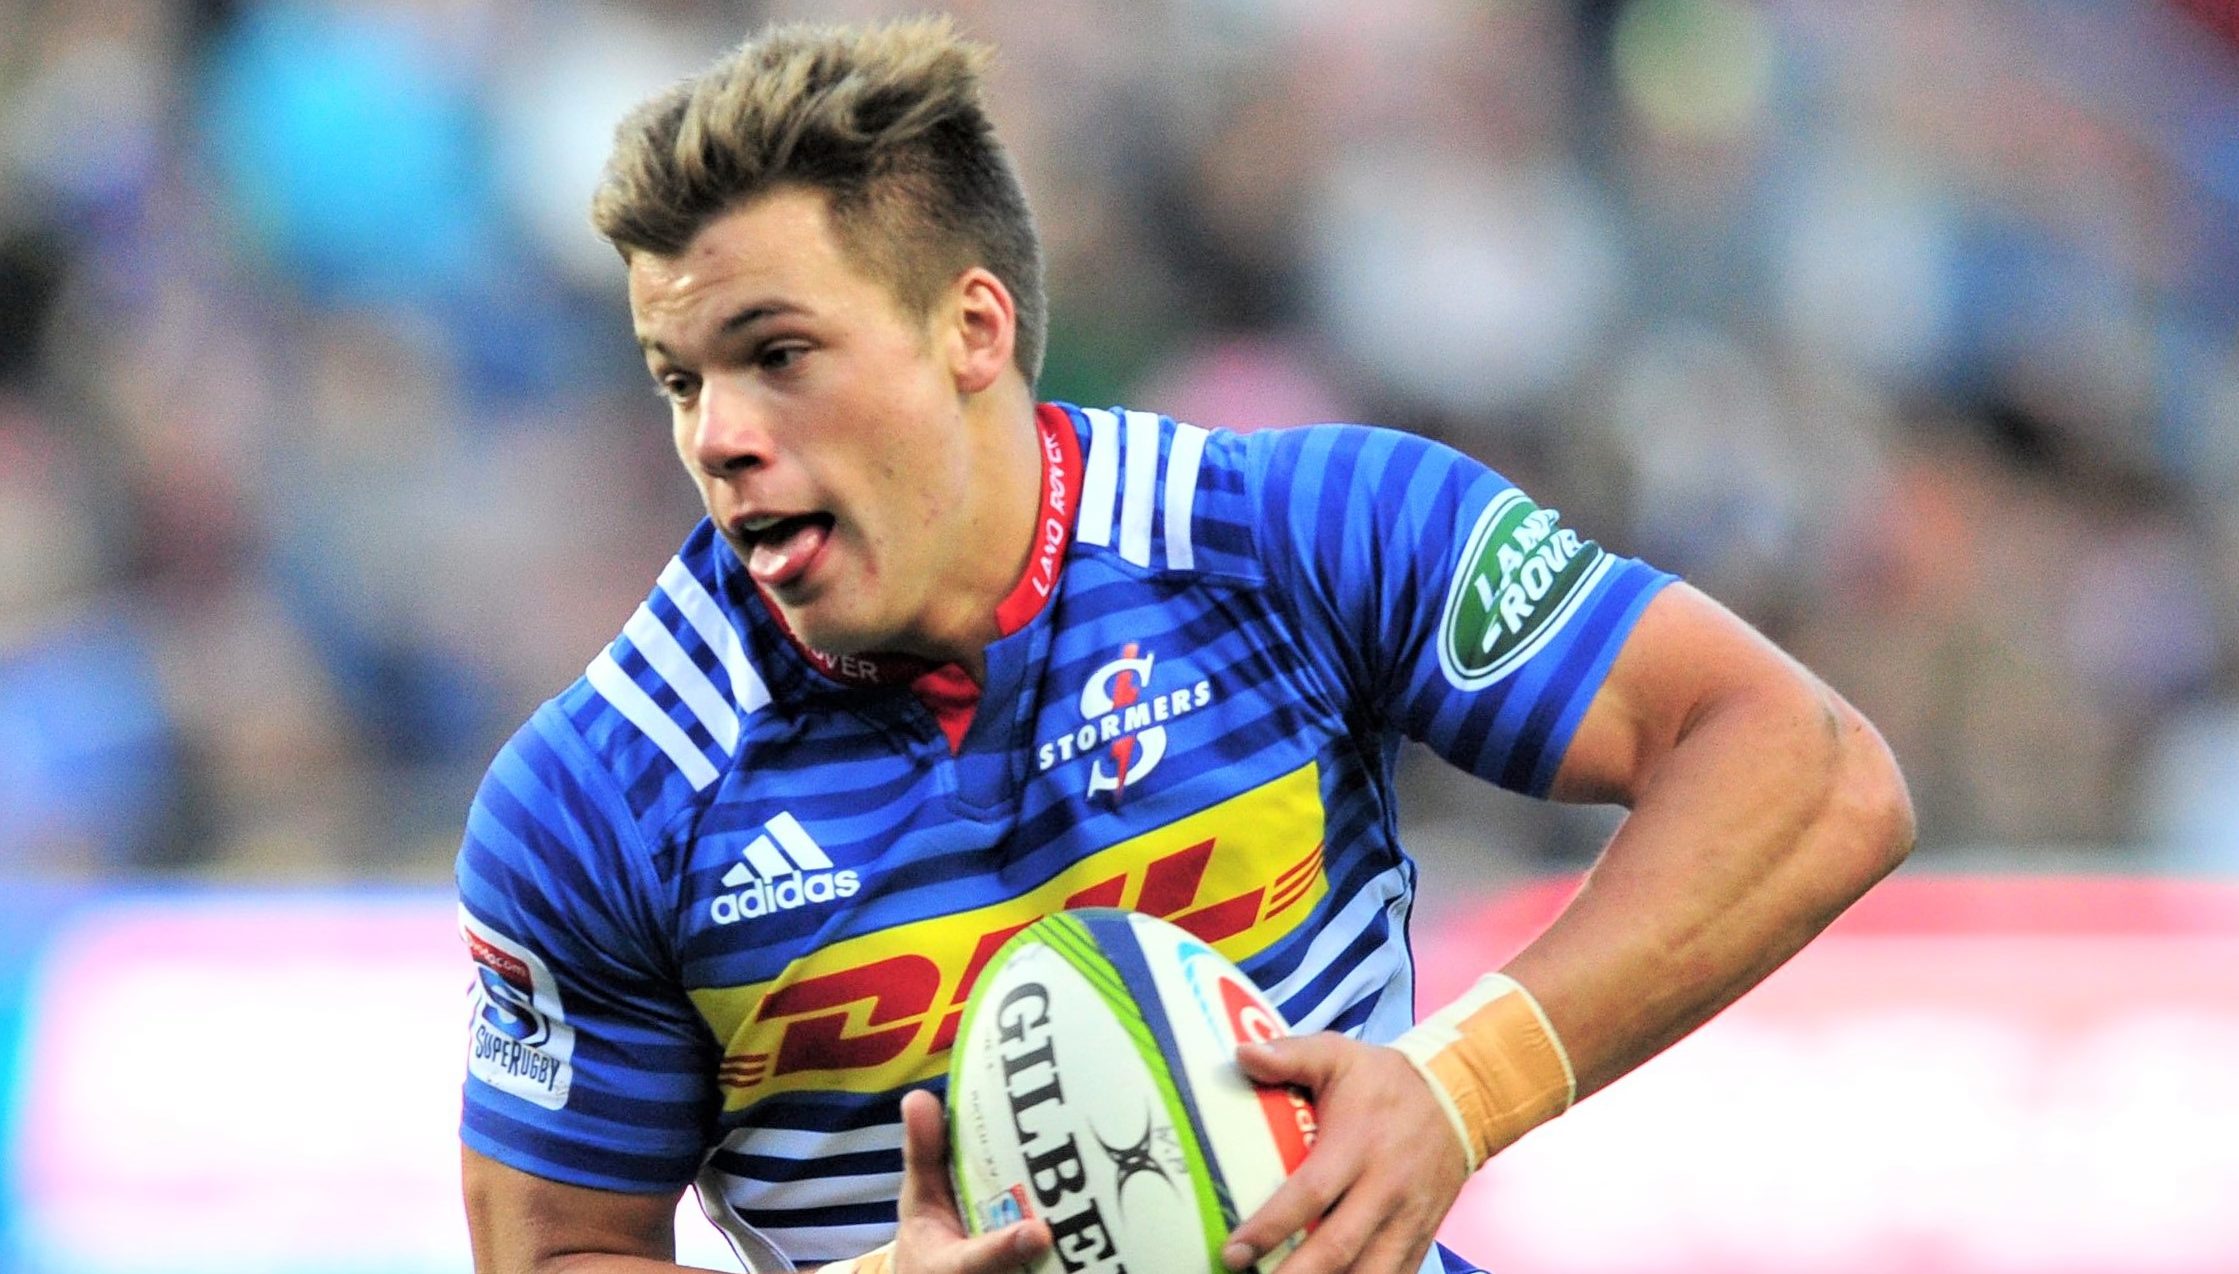 epa05428213 Huw Jones of the Stormers scores a try during the 2016 Super Rugby Union game between the Stormers and the Kings at Newlands Stadium, Cape Town, South Africa, 16 July 2016. EPA/RYAN WILKISKY